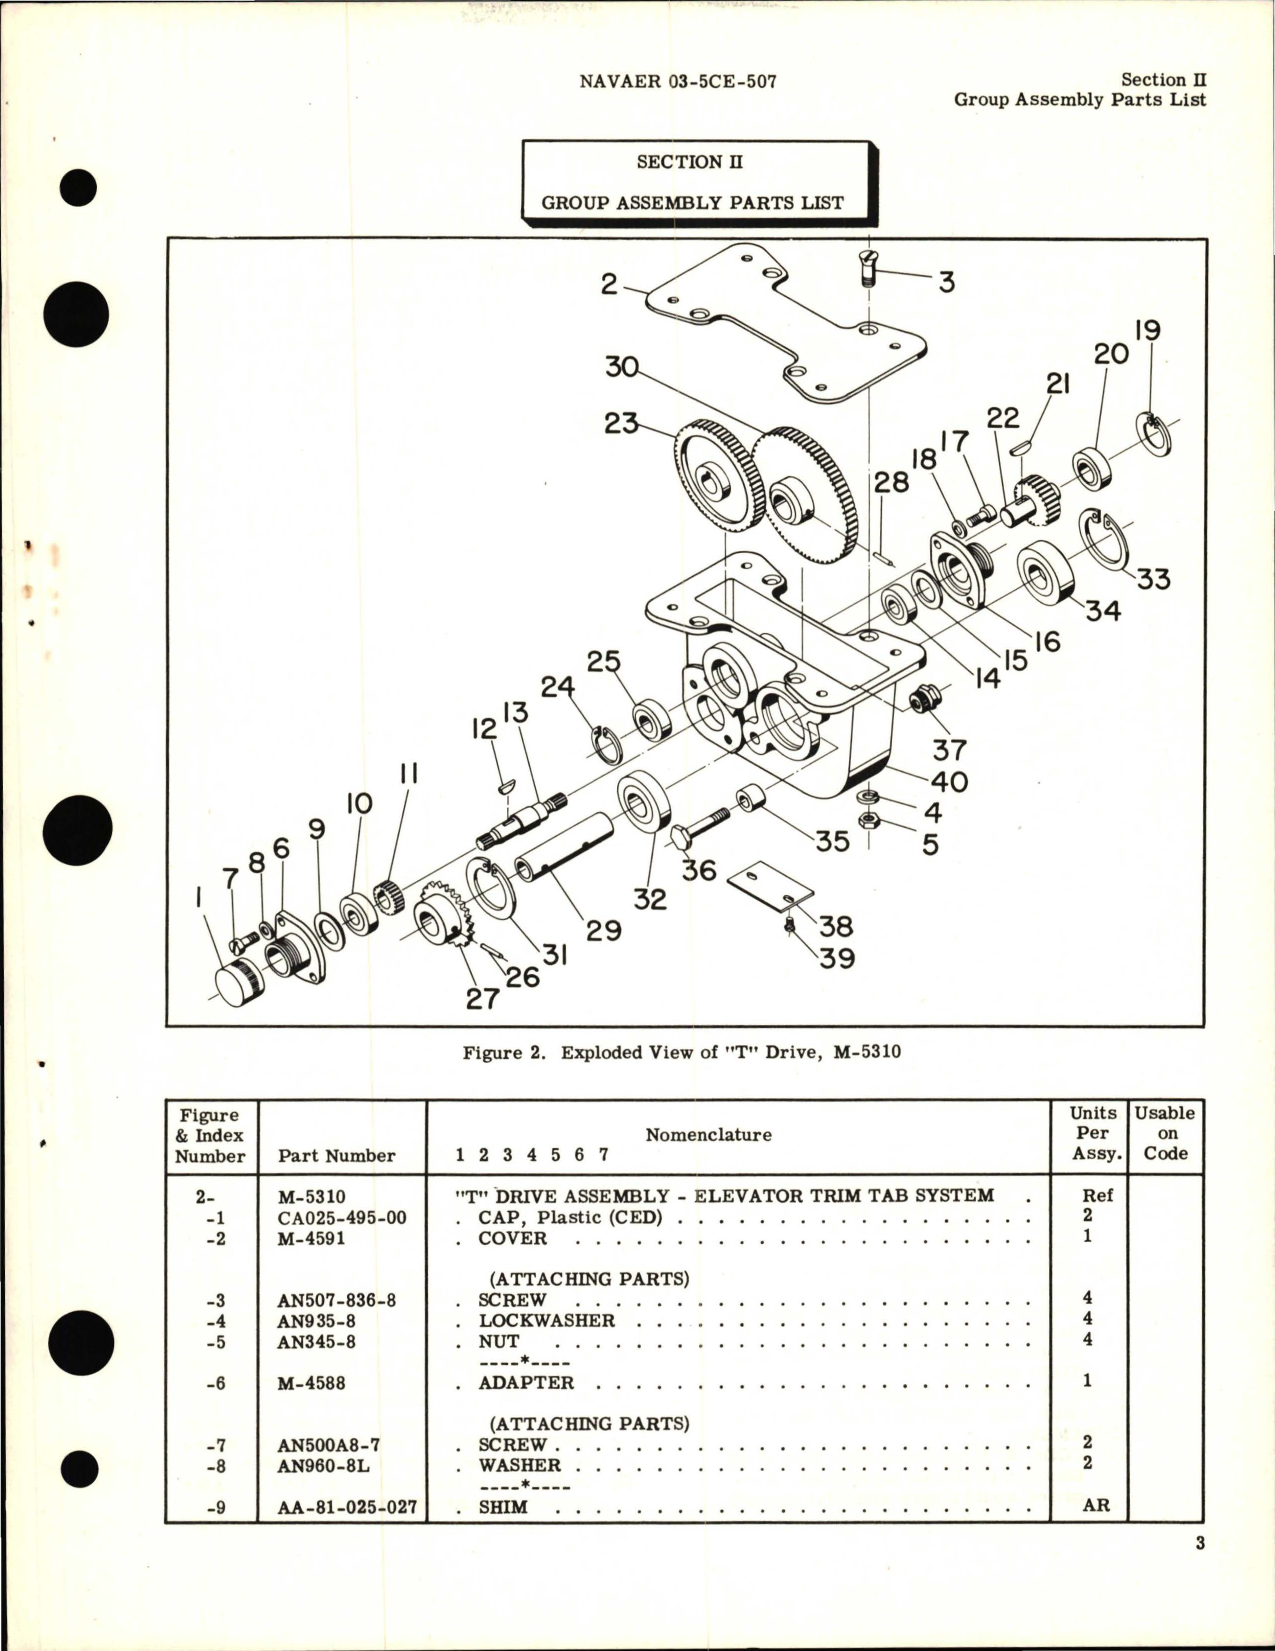 Sample page 5 from AirCorps Library document:  Illustrated Parts Breakdown for T Drive - Part M-5310 